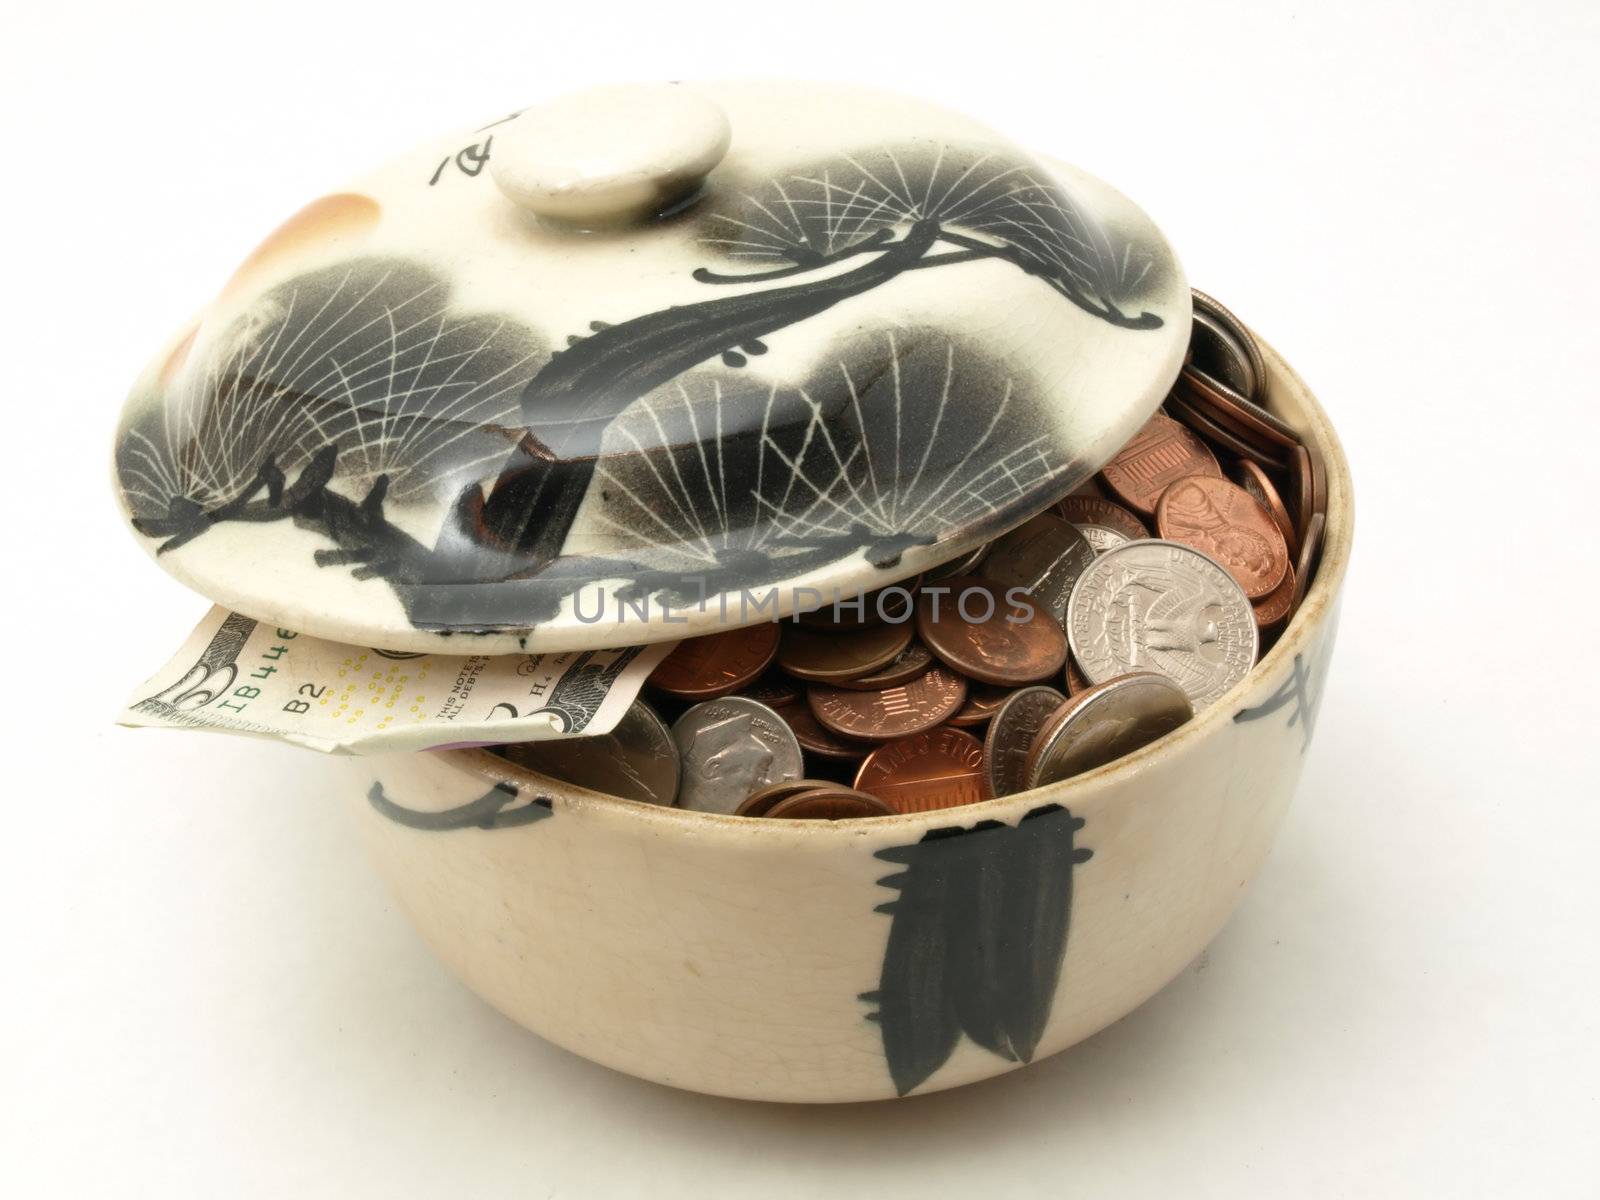 A small covered bowl full of US coins isolated on a white background.